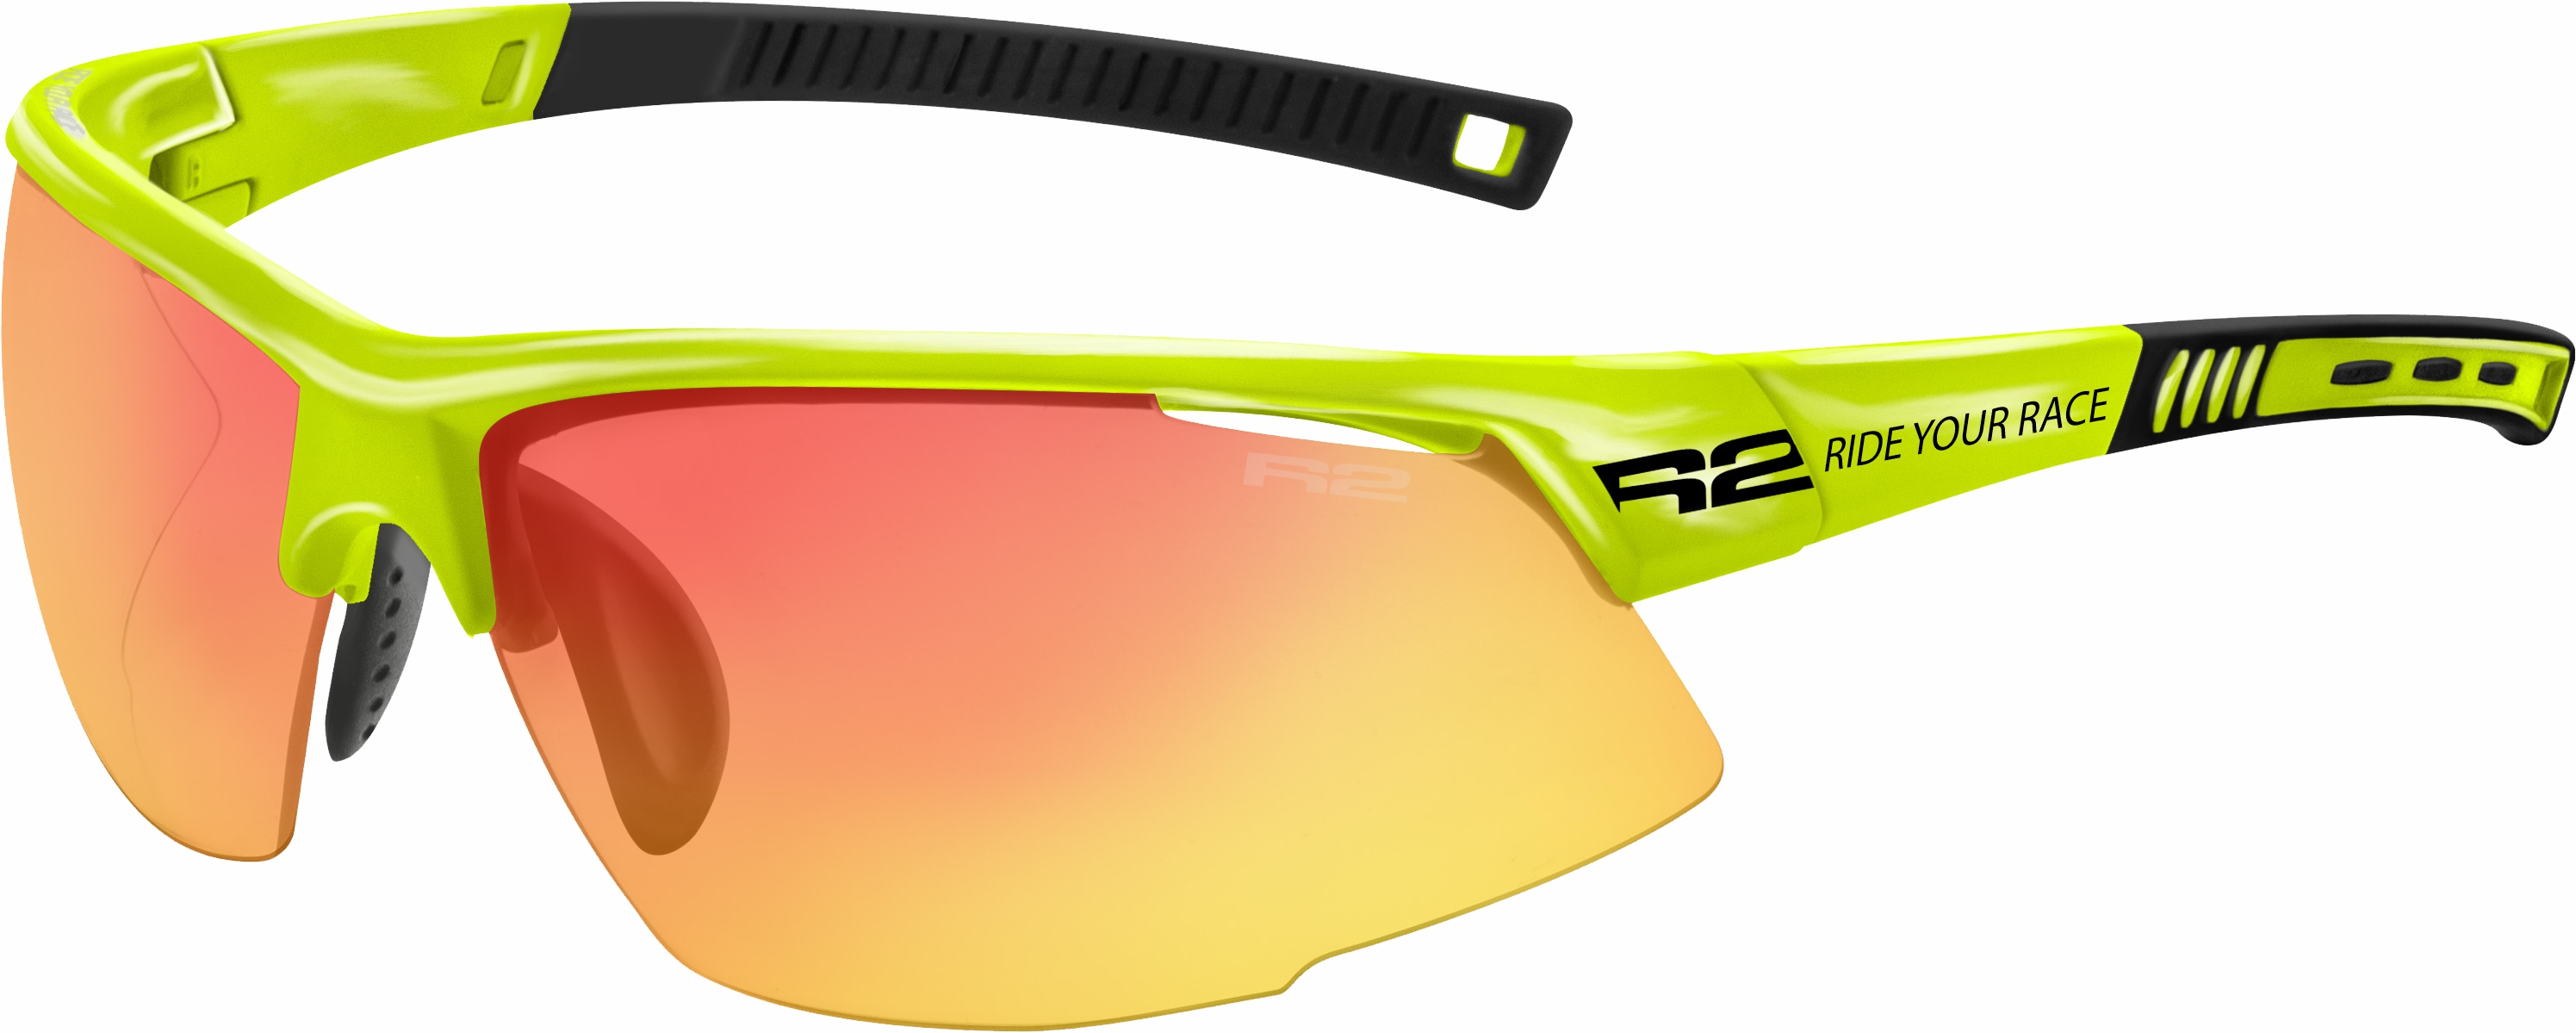 Photochromatic sunglasses  R2 RACER AT063A5 standard